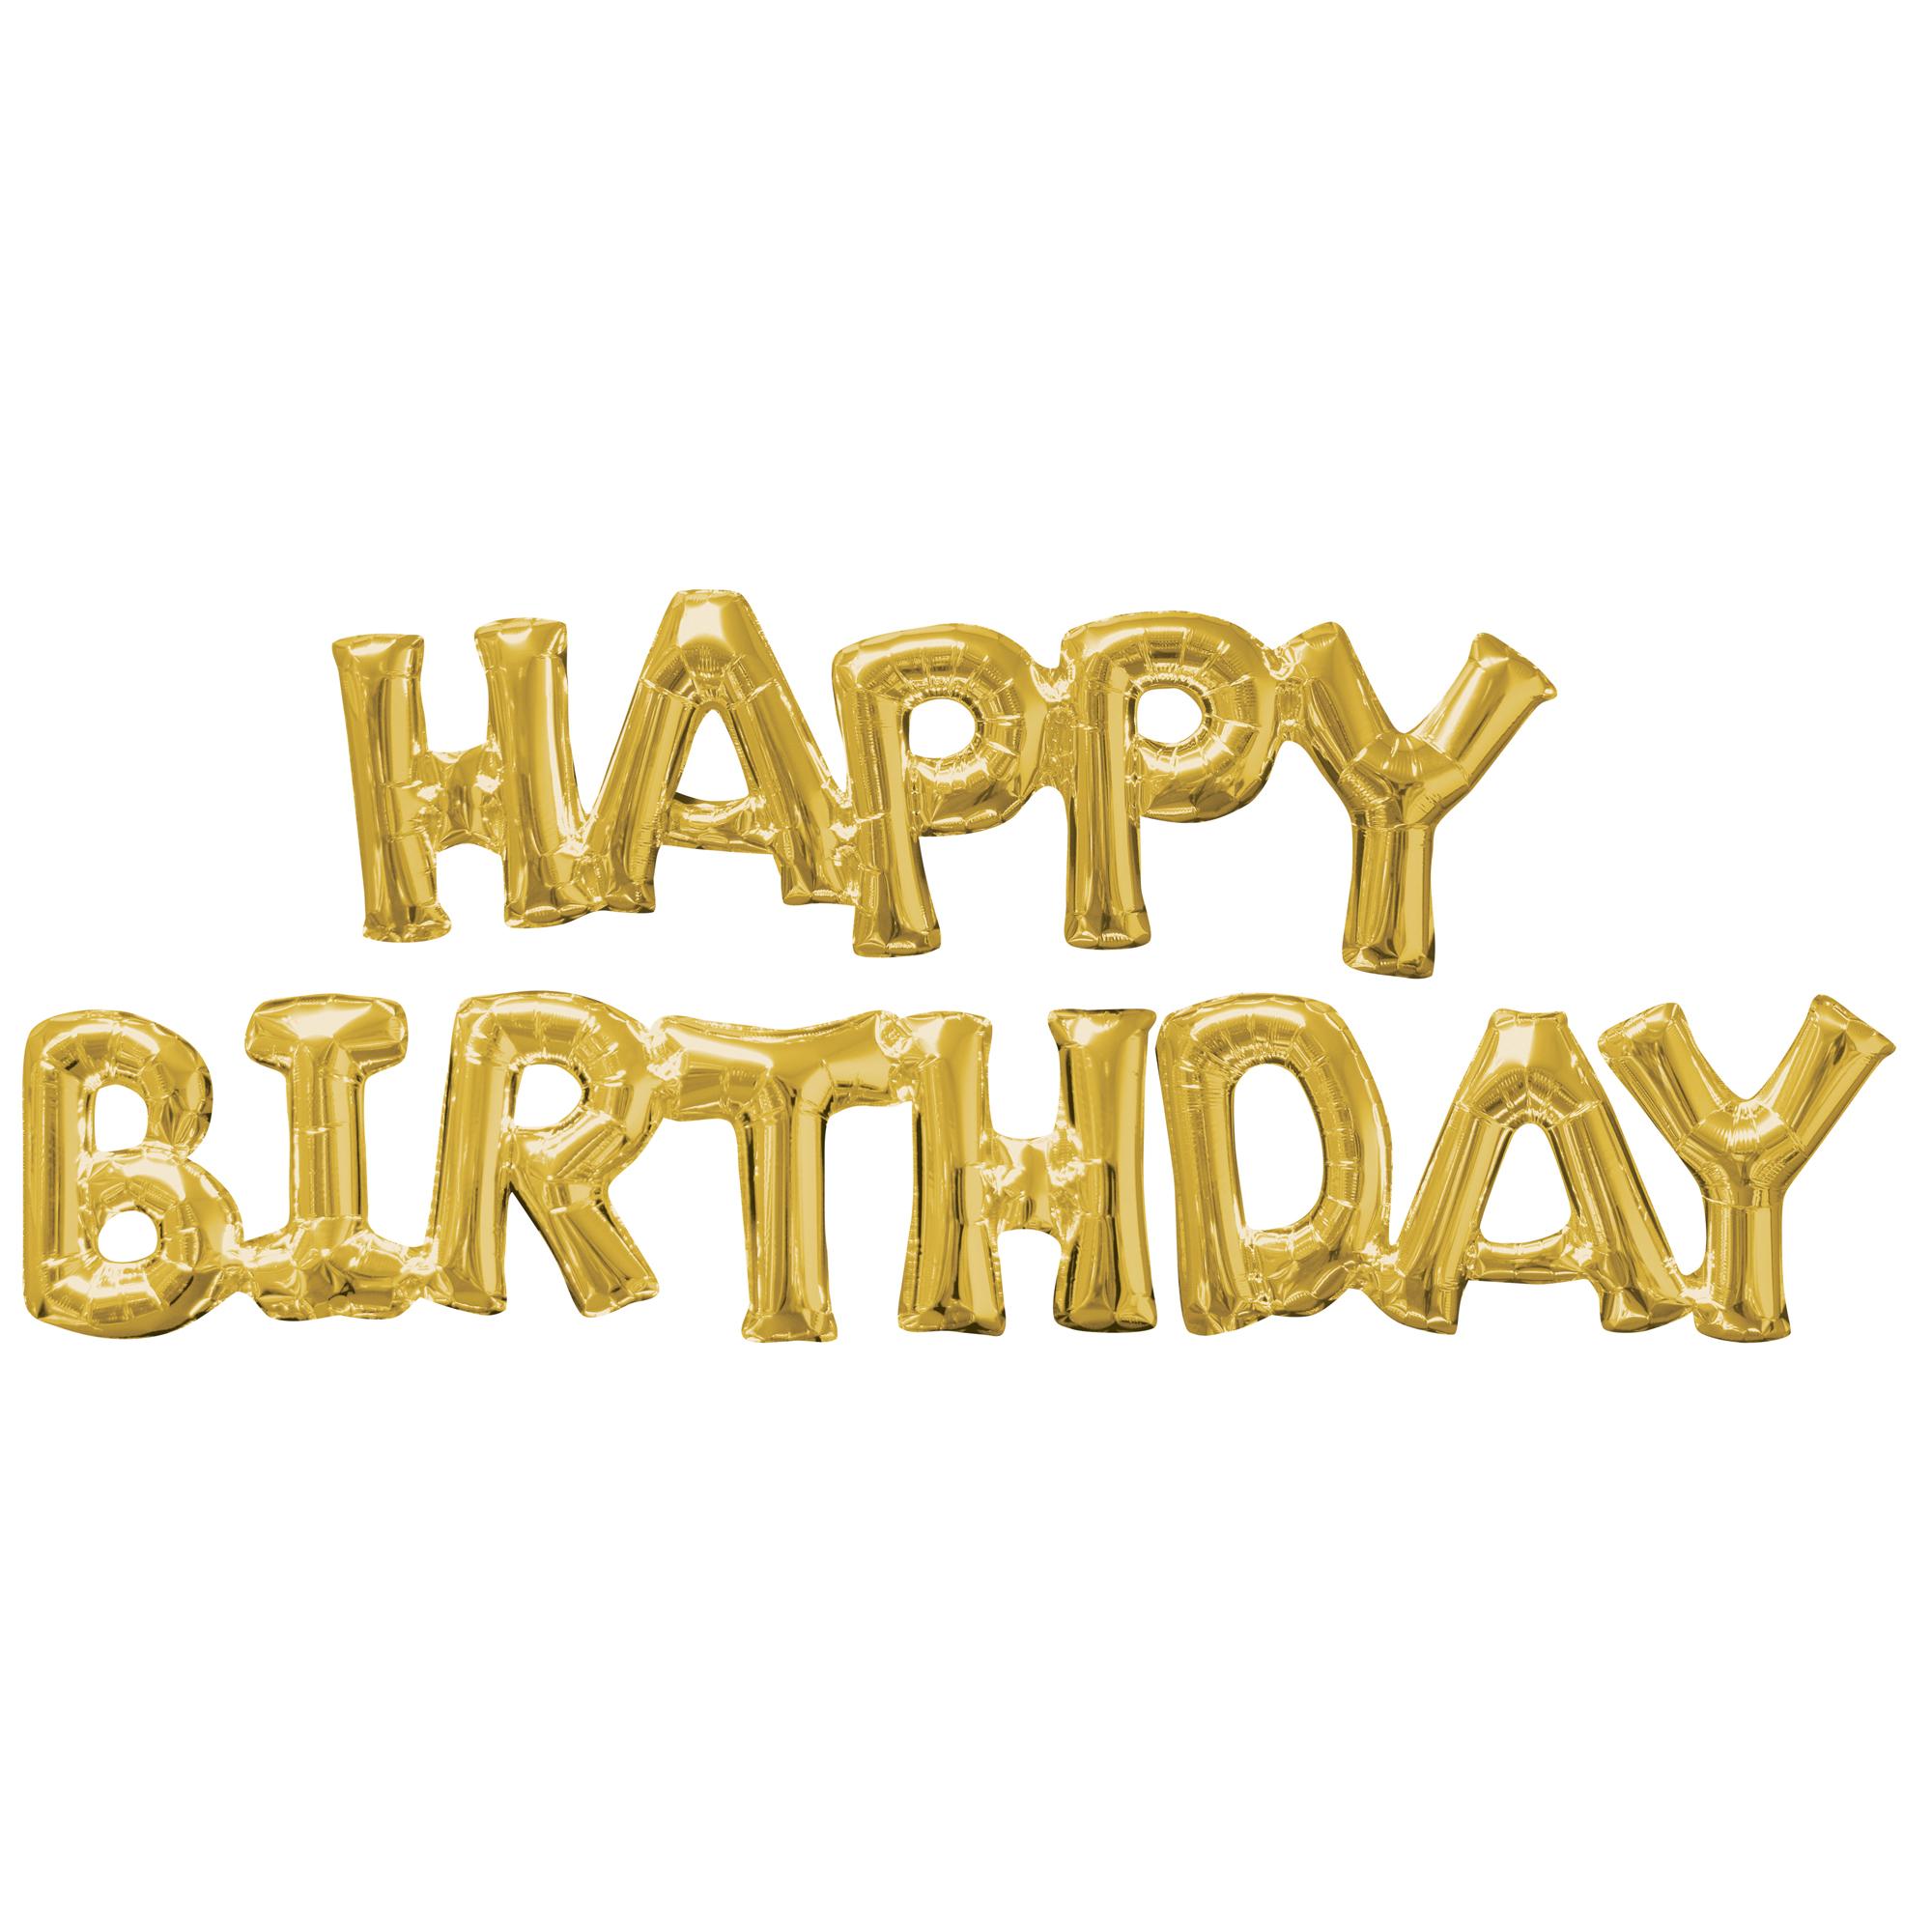 Happy Birthday Gold Phrase Foil Balloon Balloons & Streamers - Party Centre